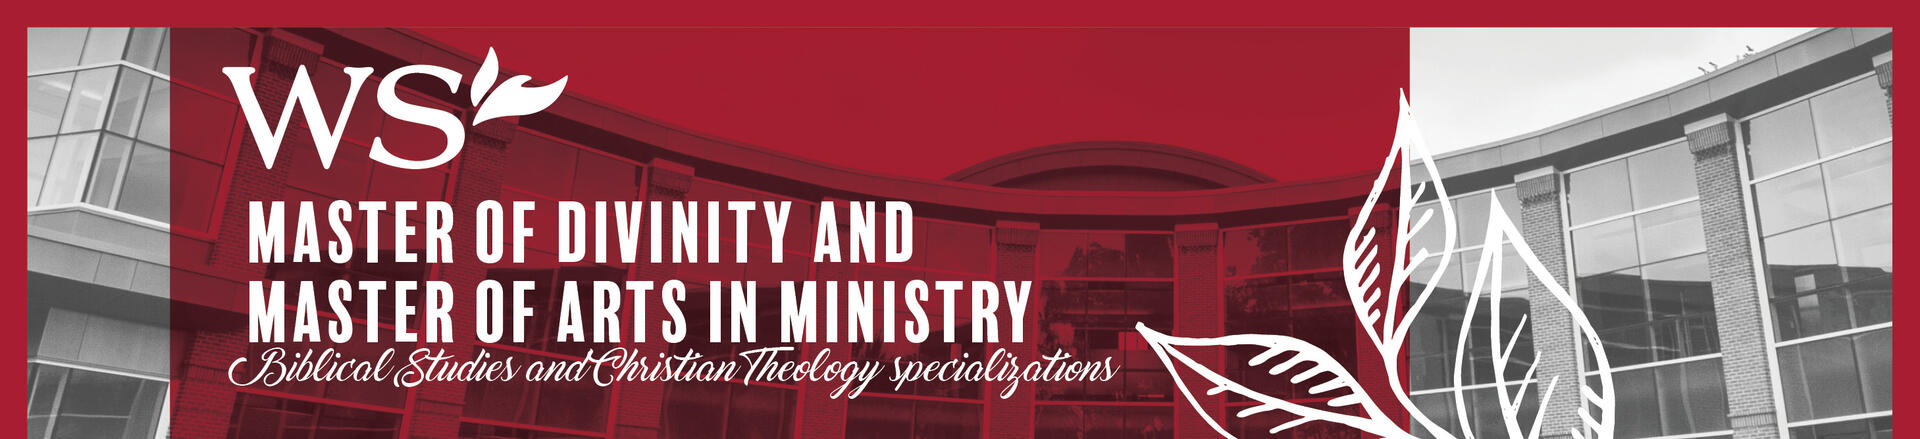 Master of Divinity and Master of Arts in Ministry